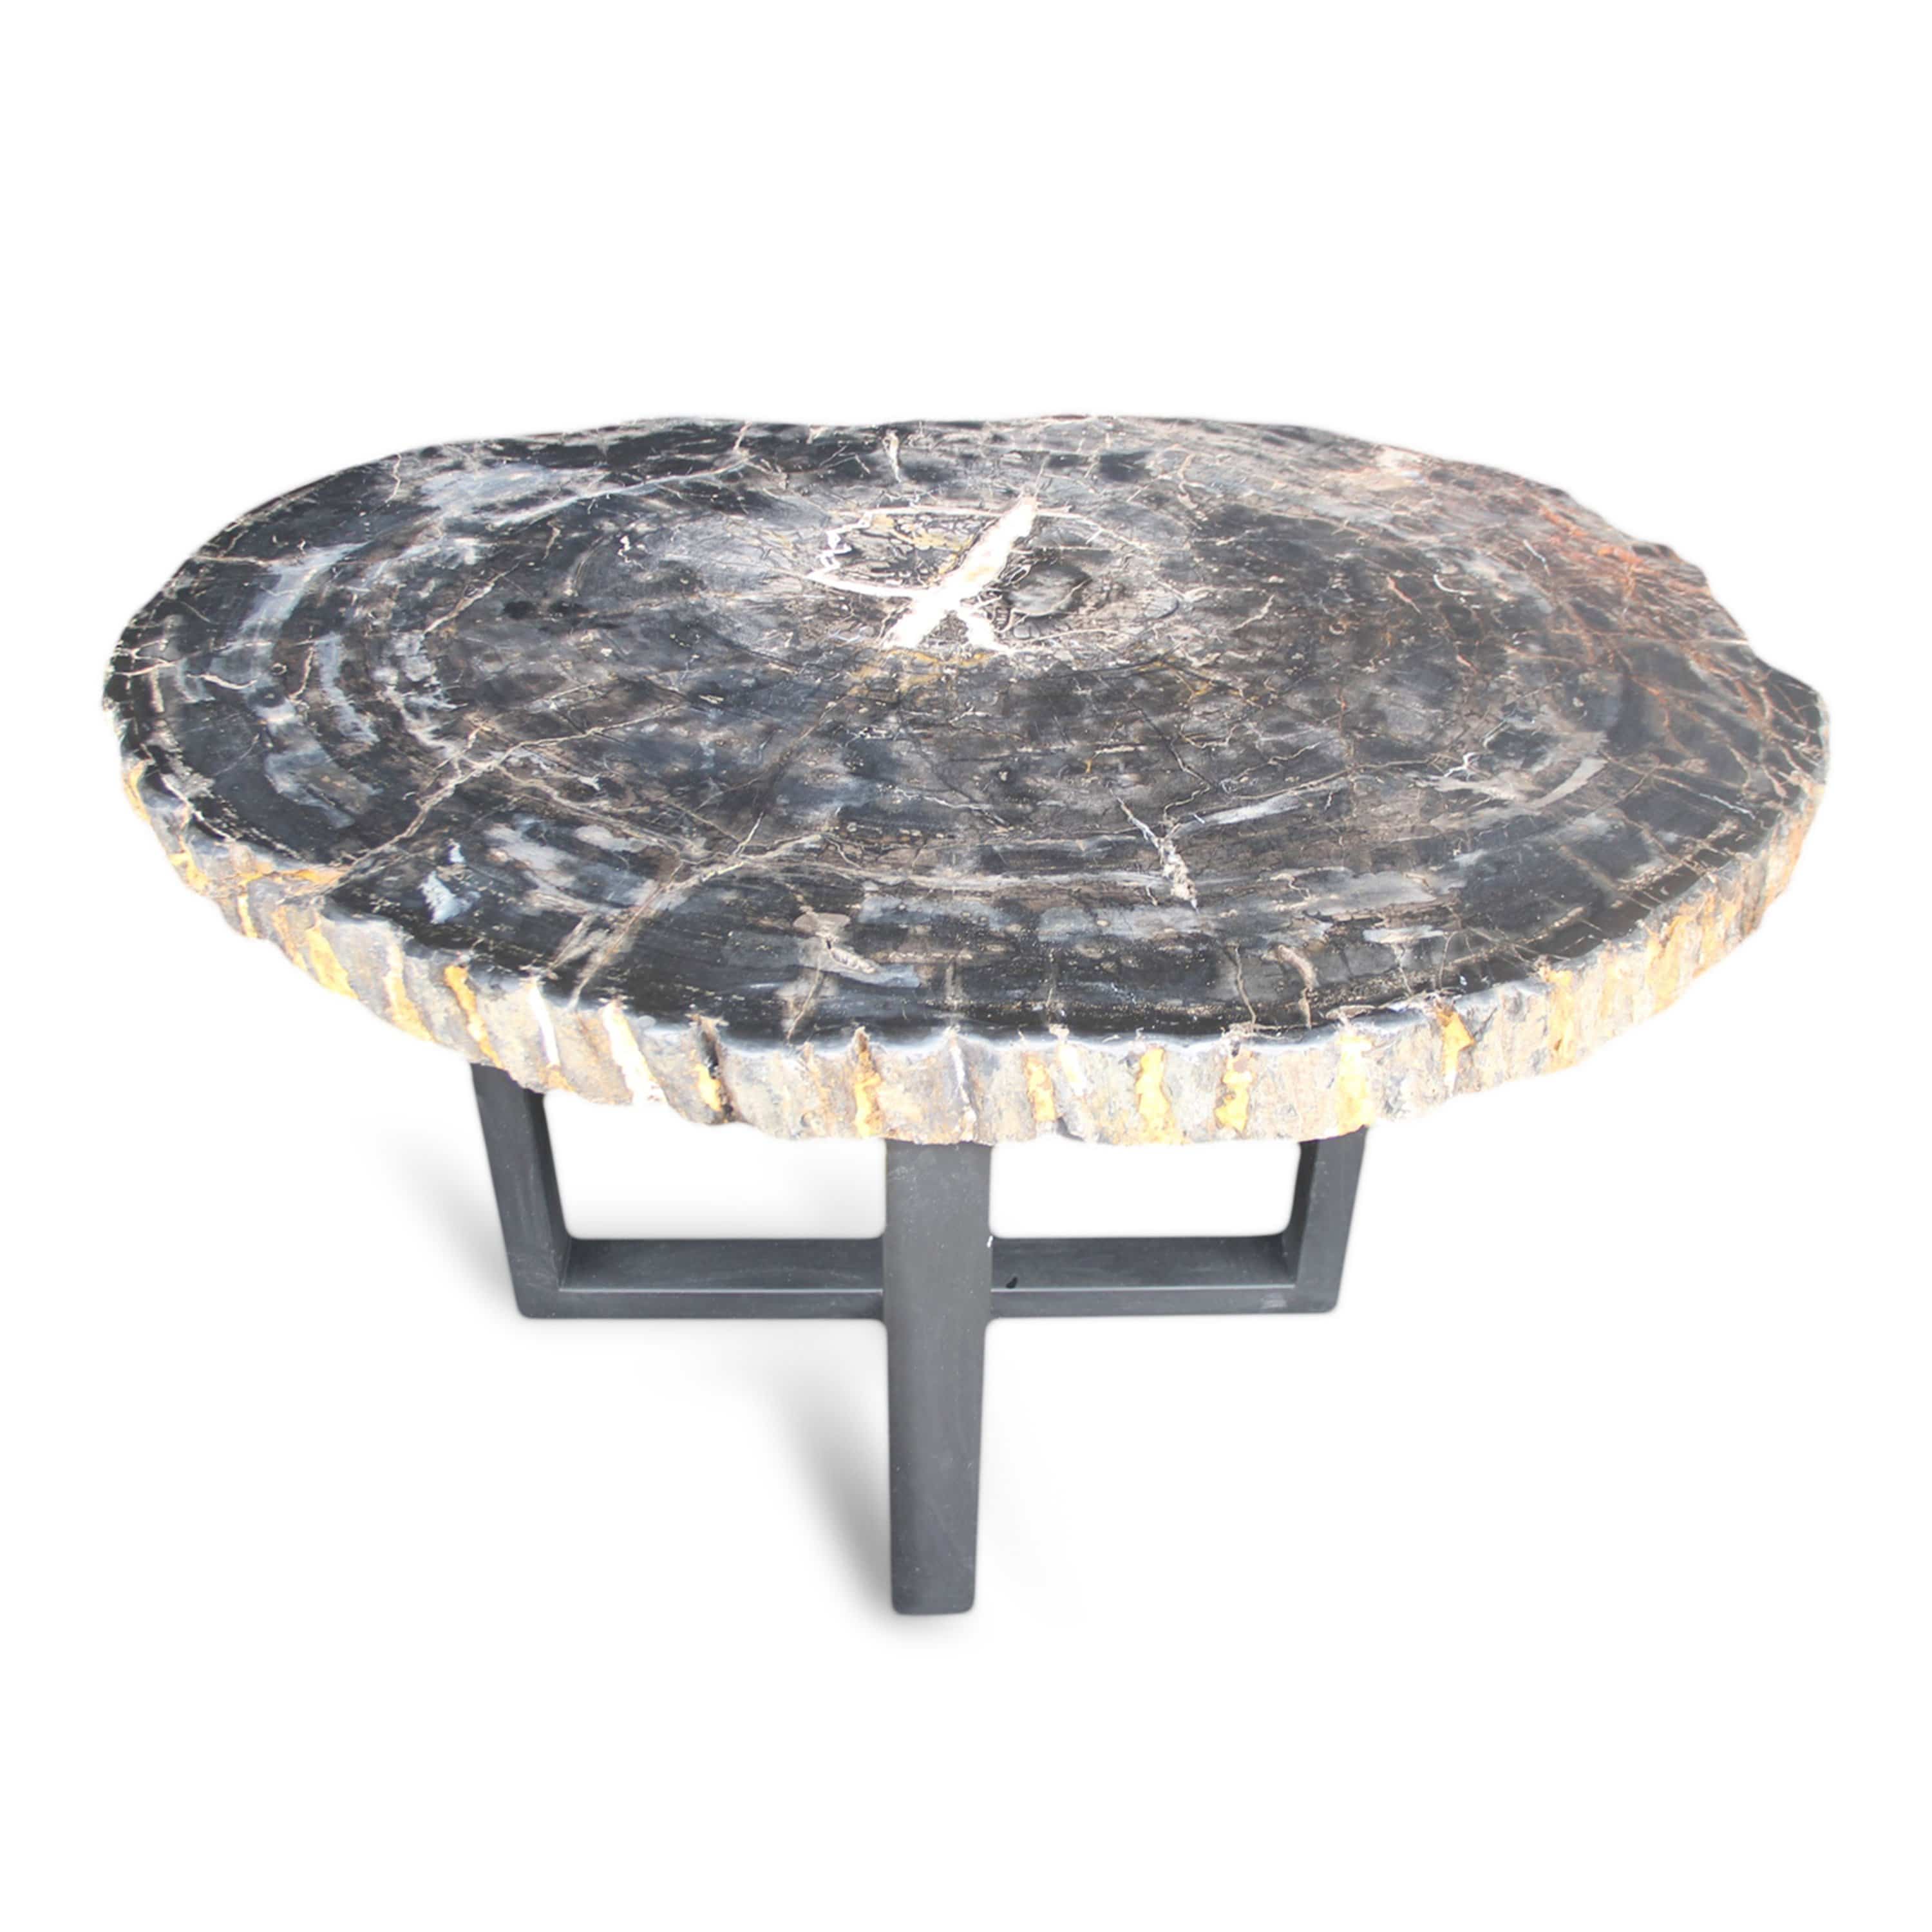 Kalifano Petrified Wood Natural Polished Petrified Wood Round Table Top from Indonesia - 45" / 276 lbs PWT7500.002